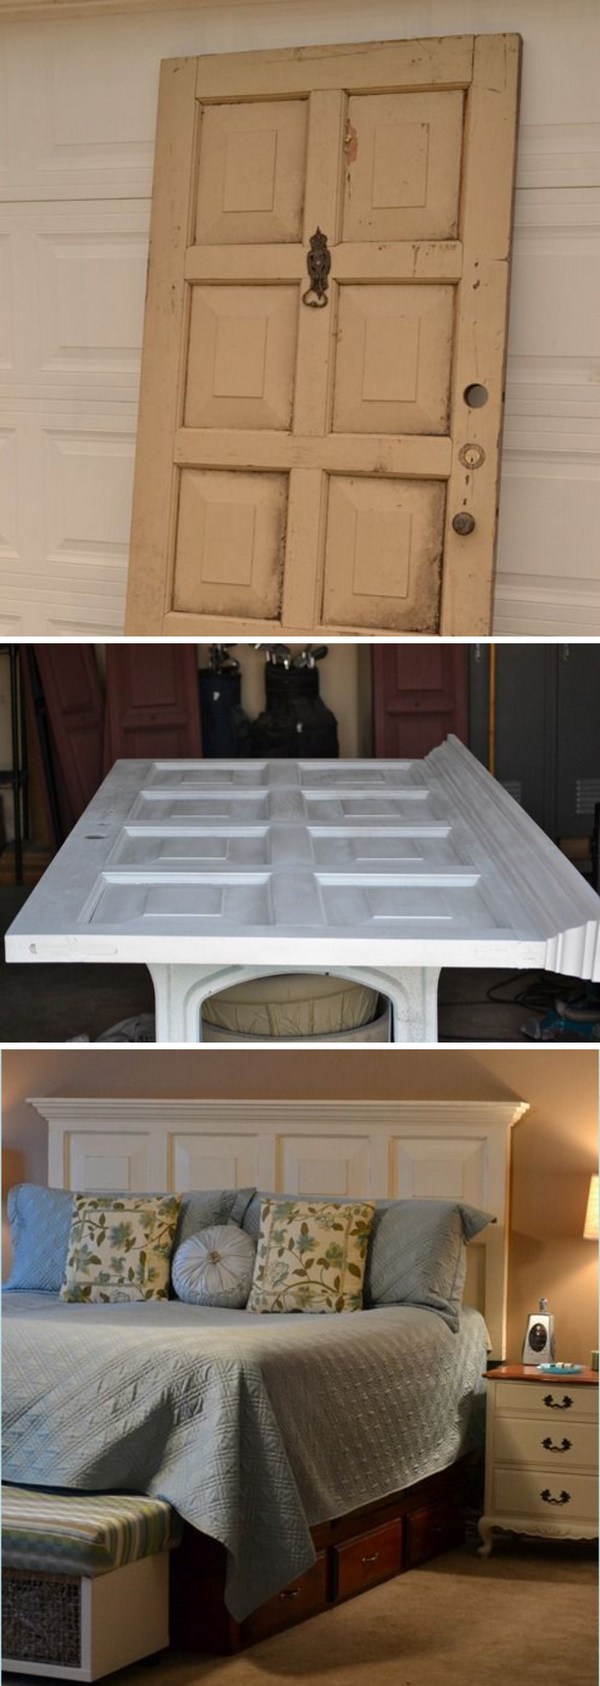 DIY Door Headboard: A creative way to upcycle your old doors! Like this one, you can turn the old door into a gorgeous DIY headbord with some white paint and a bit of handiwork. 